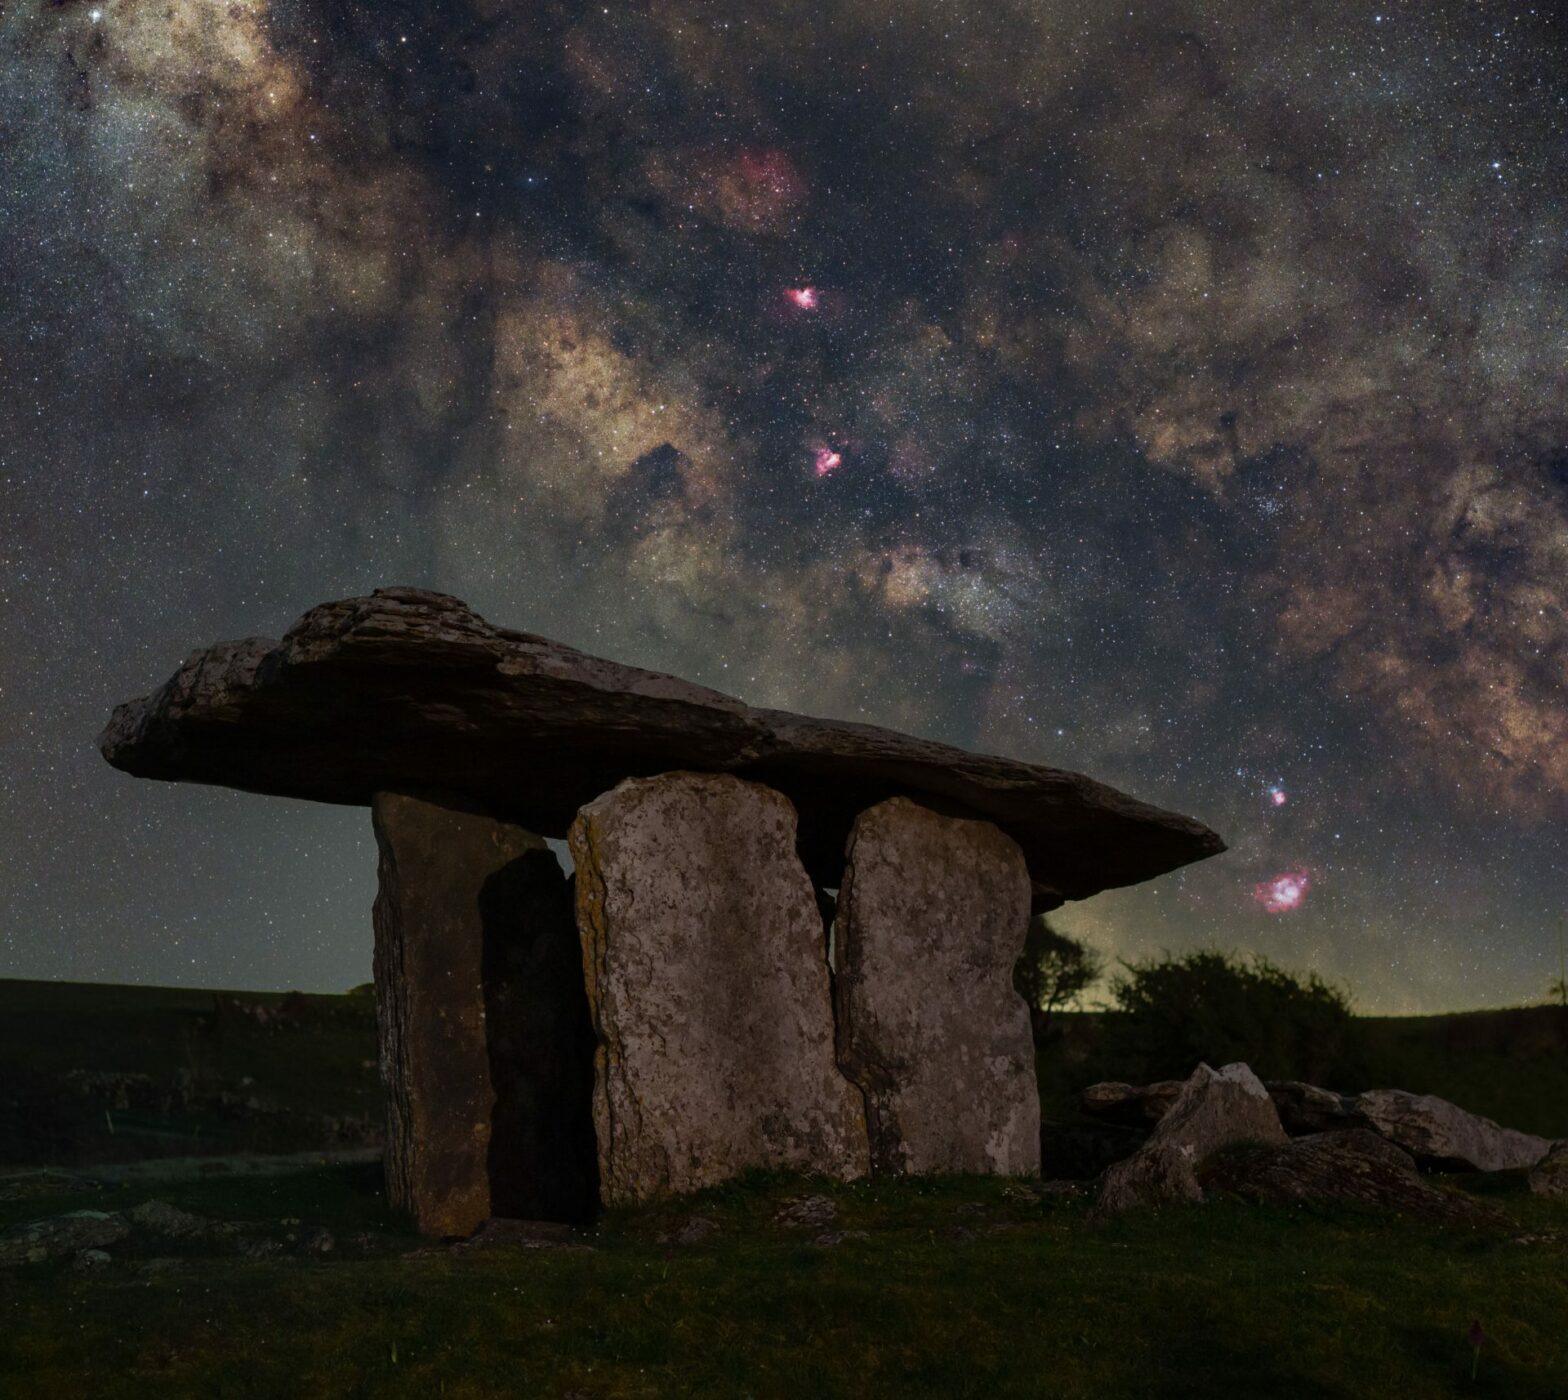 Kildare Nationalist — Kildare man’s photo features in Reach of the Stars astrophotography exhibition